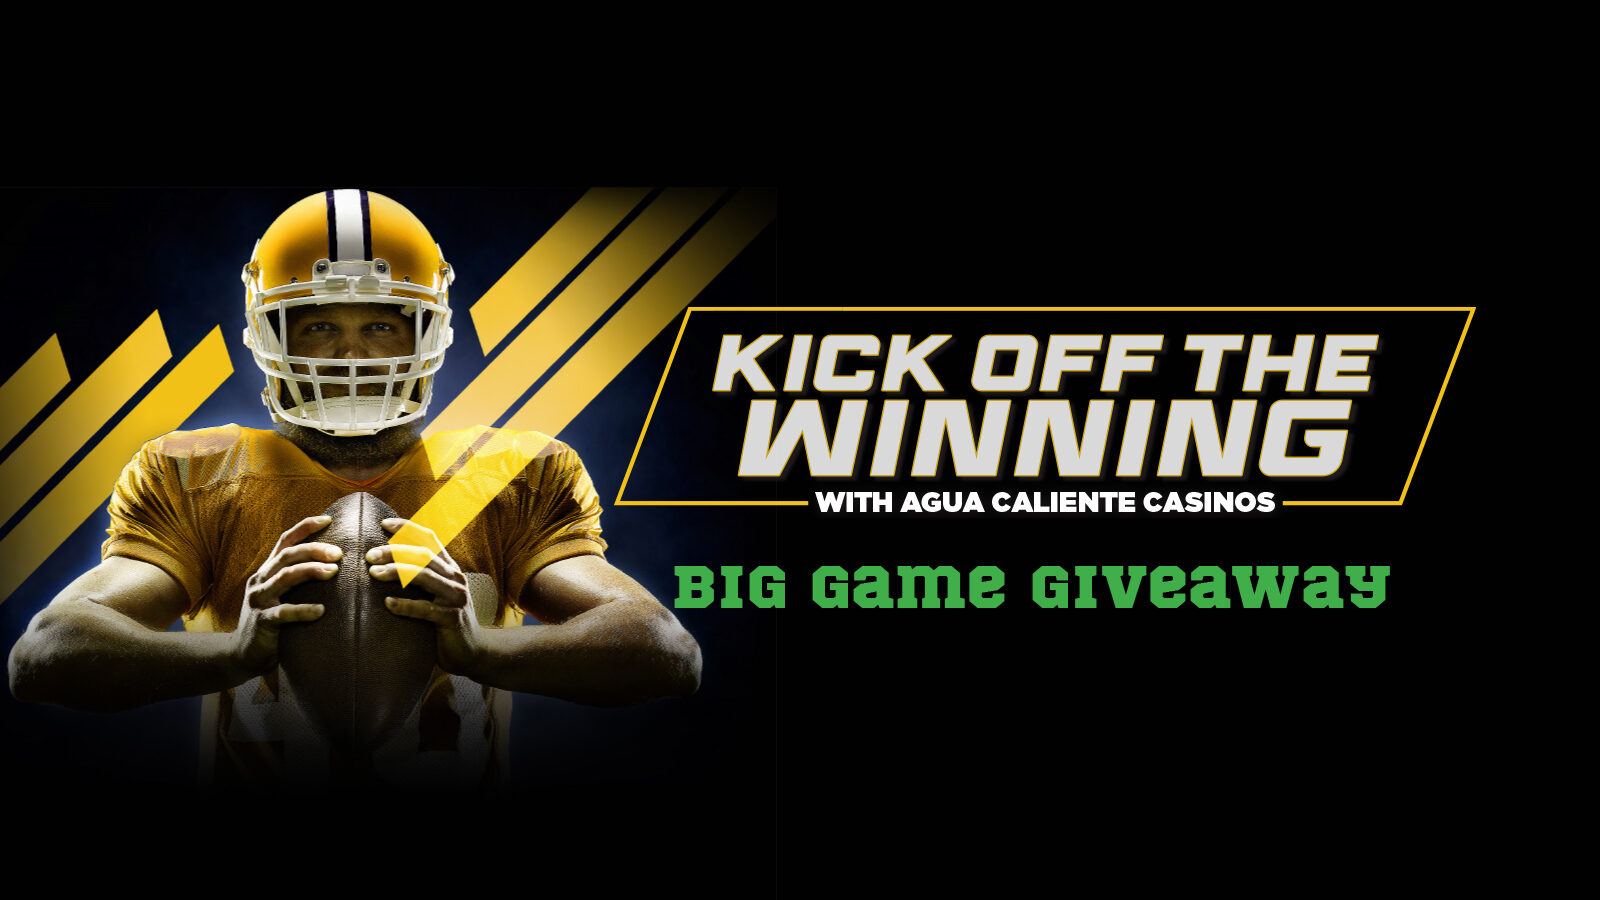 The Big Game Giveaway